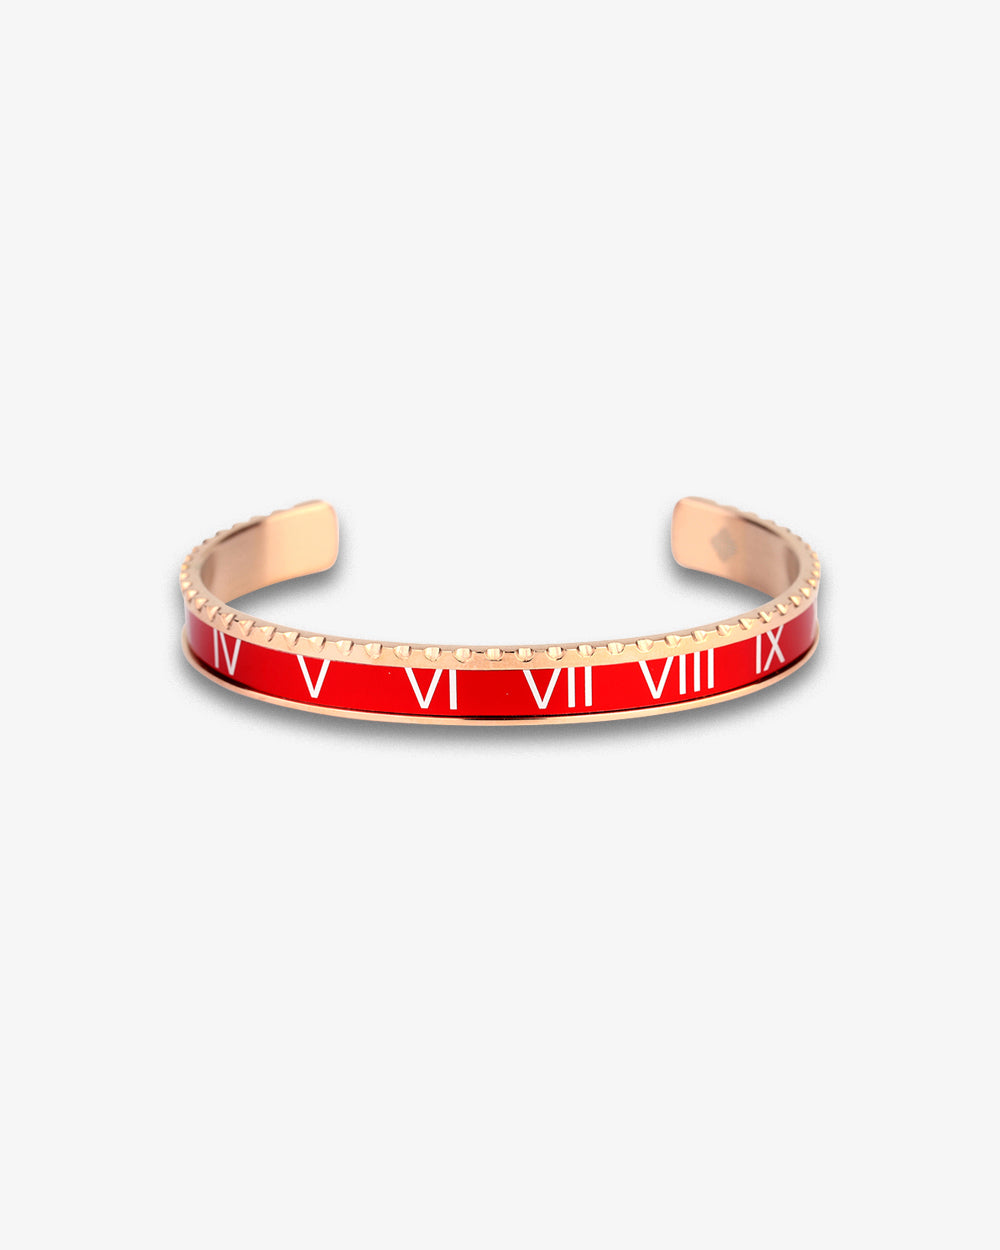 Swiss Concept Classic Roman Numeral Speed Bracelet (Red & Rose Gold) - Stainless Steel